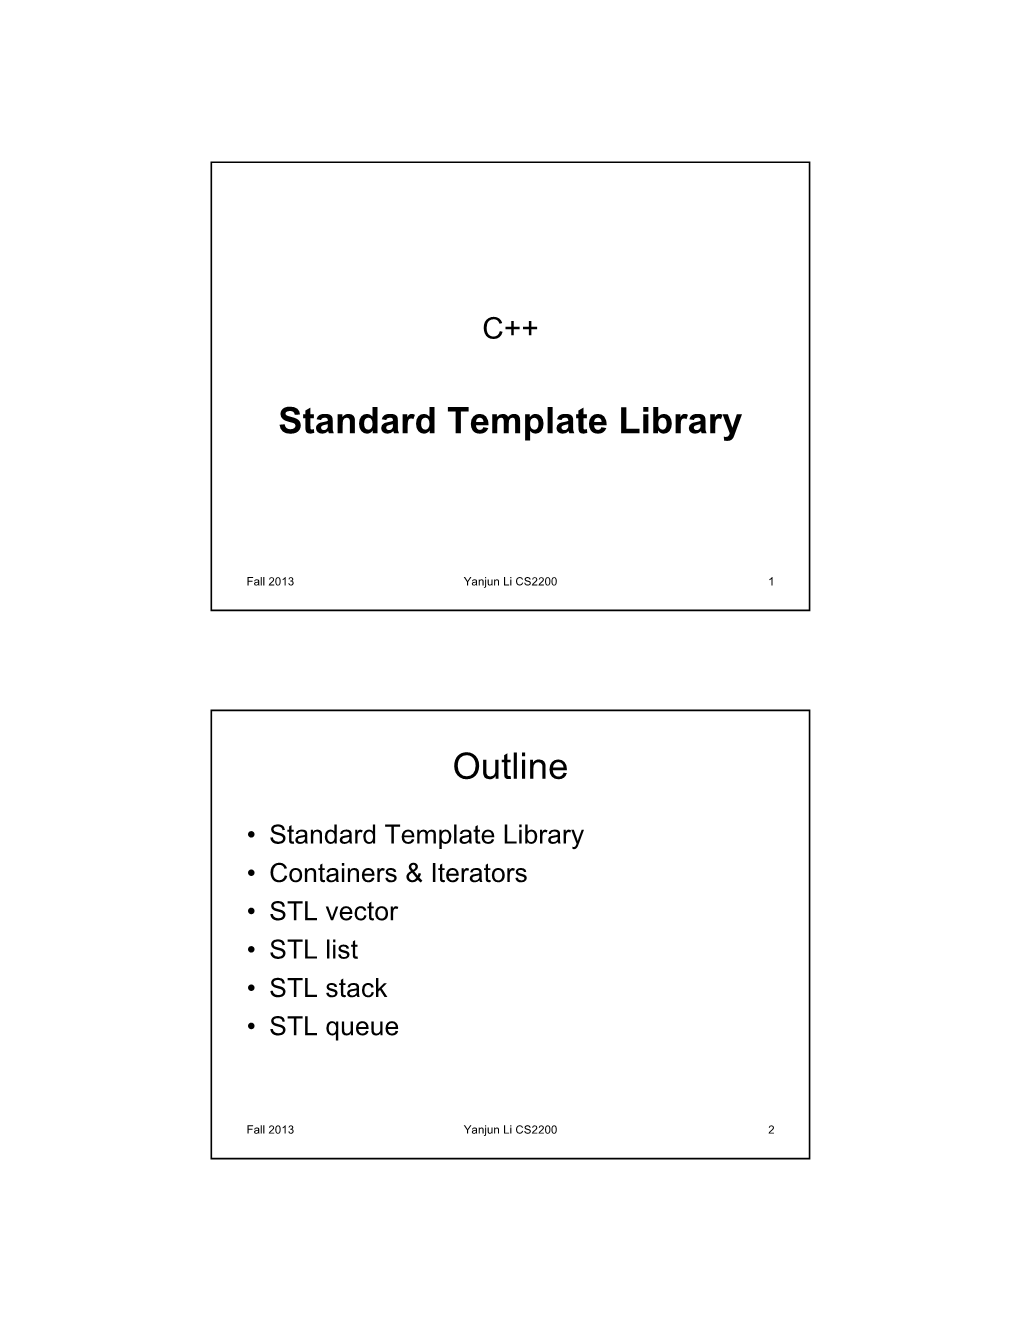 Standard Template Library Outline